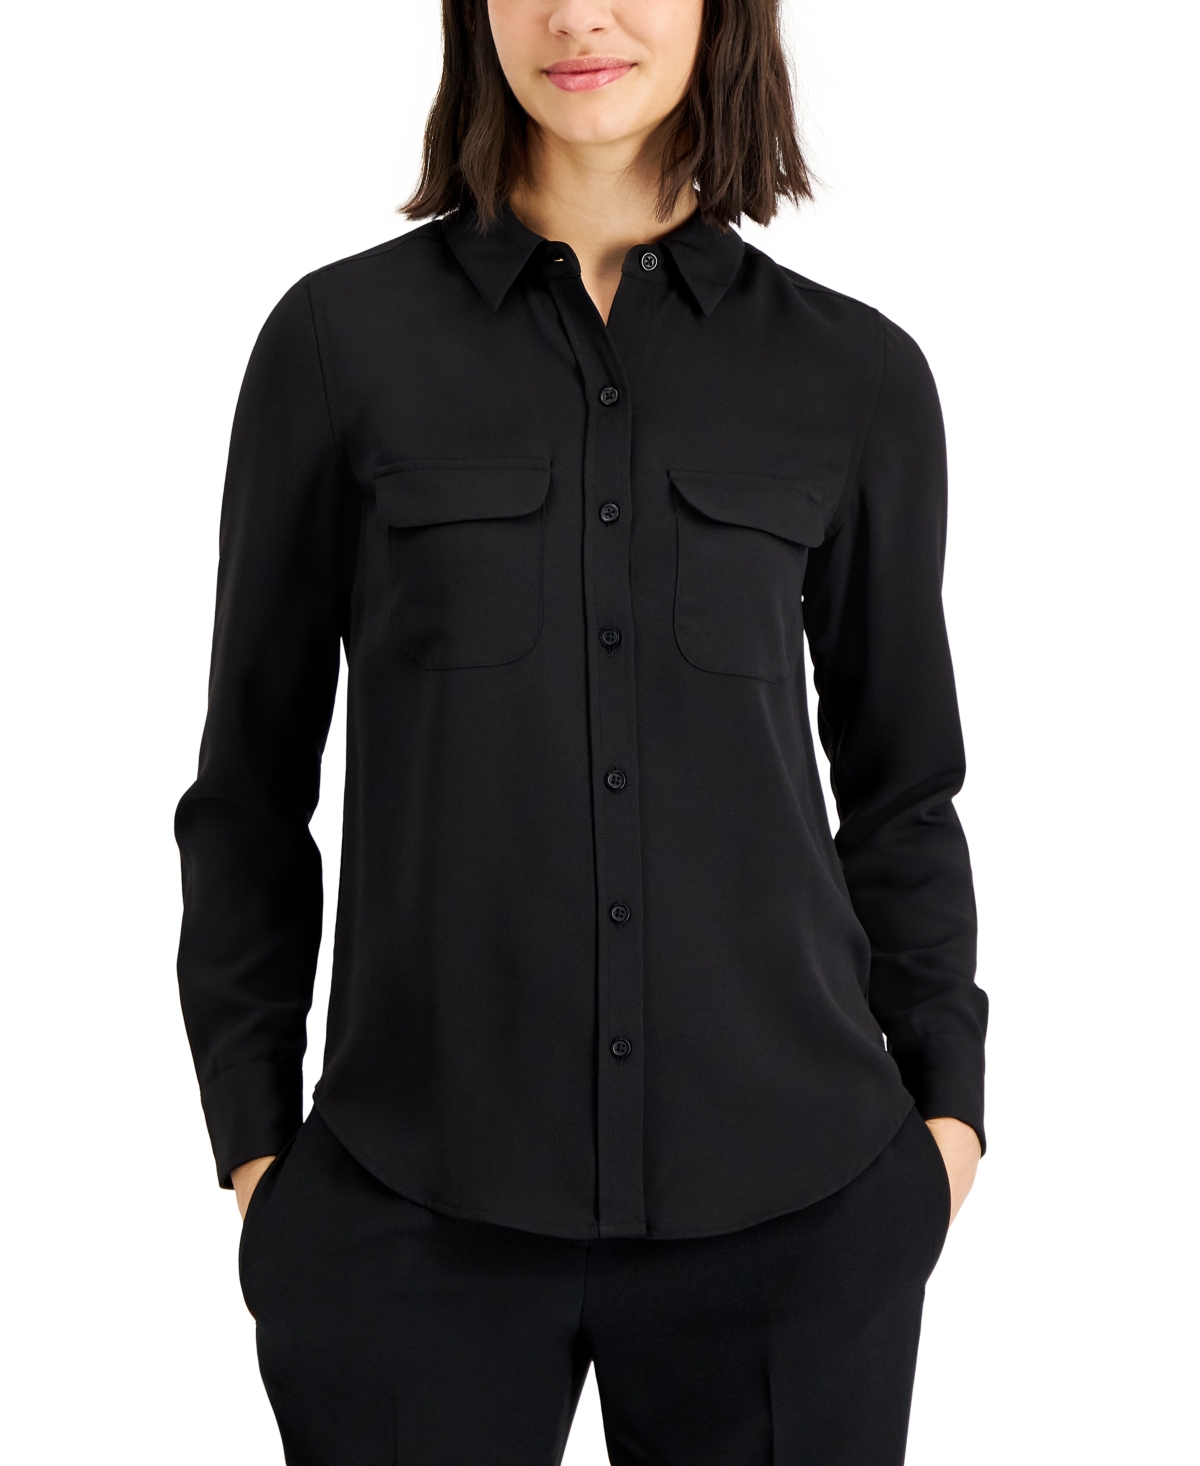 ALFANI WOMEN'S BUTTON-FRONT SHIRT, CREATED FOR MACY'S